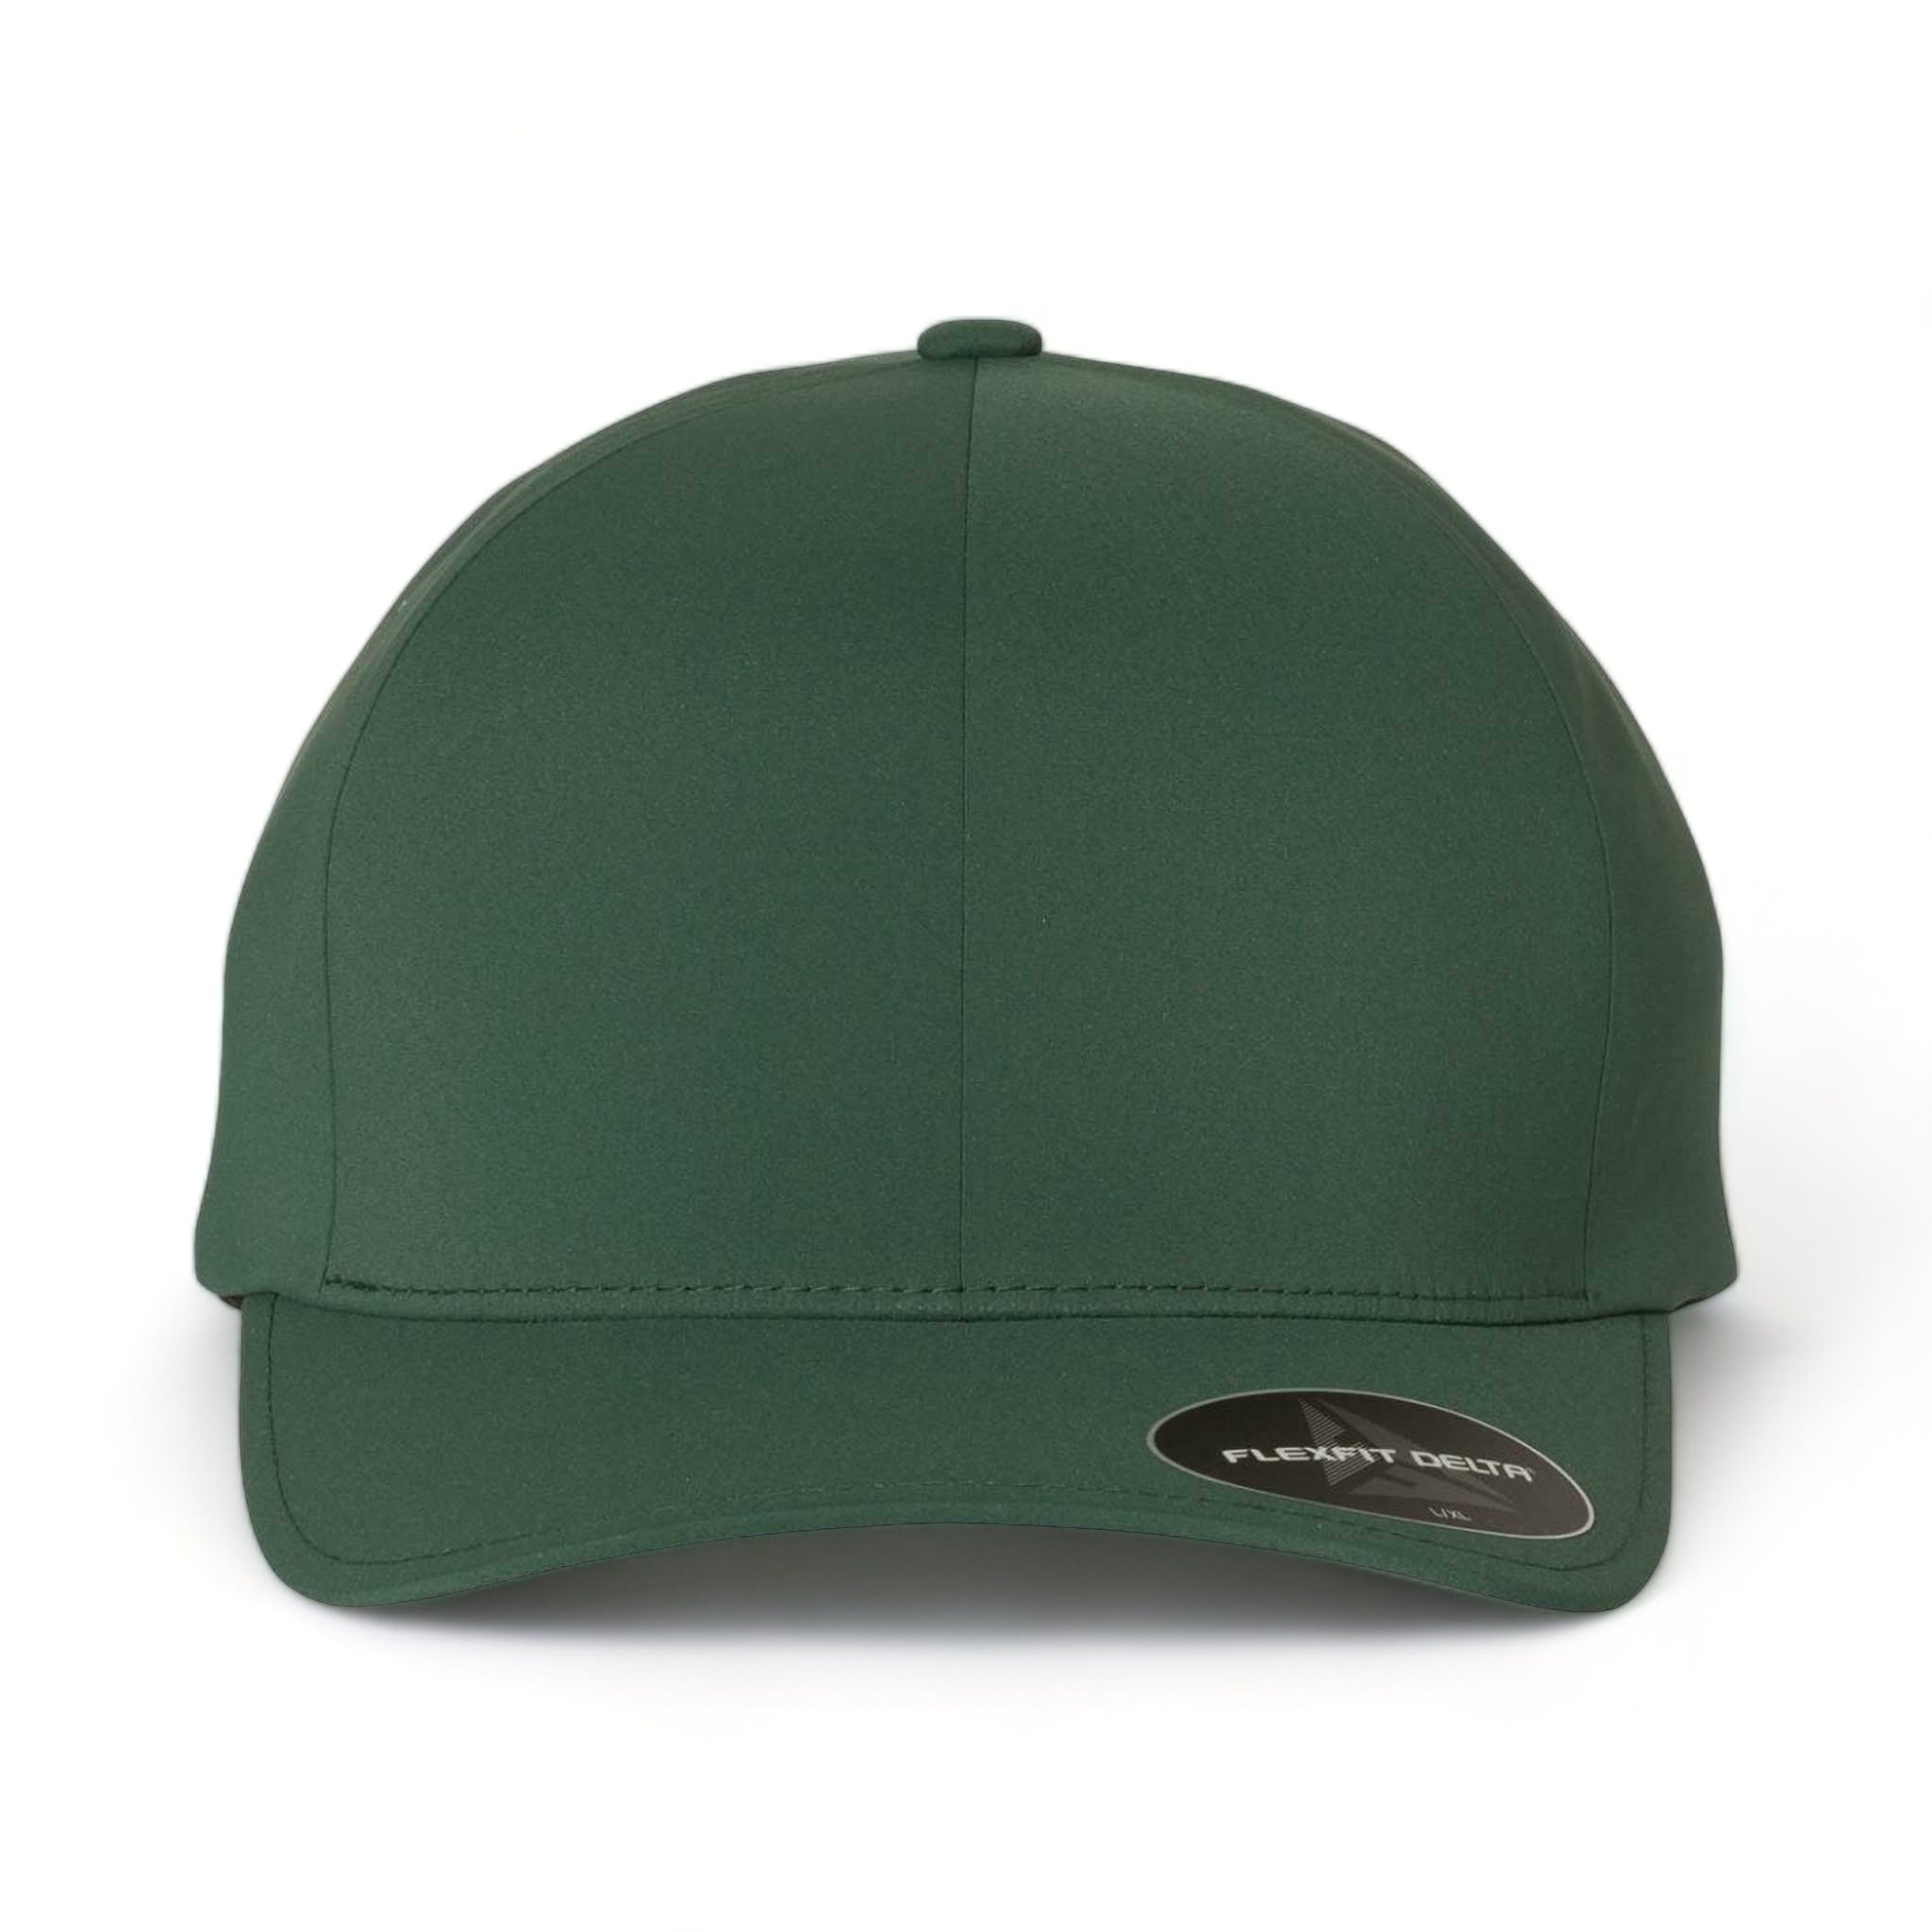 Front view of Flexfit 180 custom hat in spruce